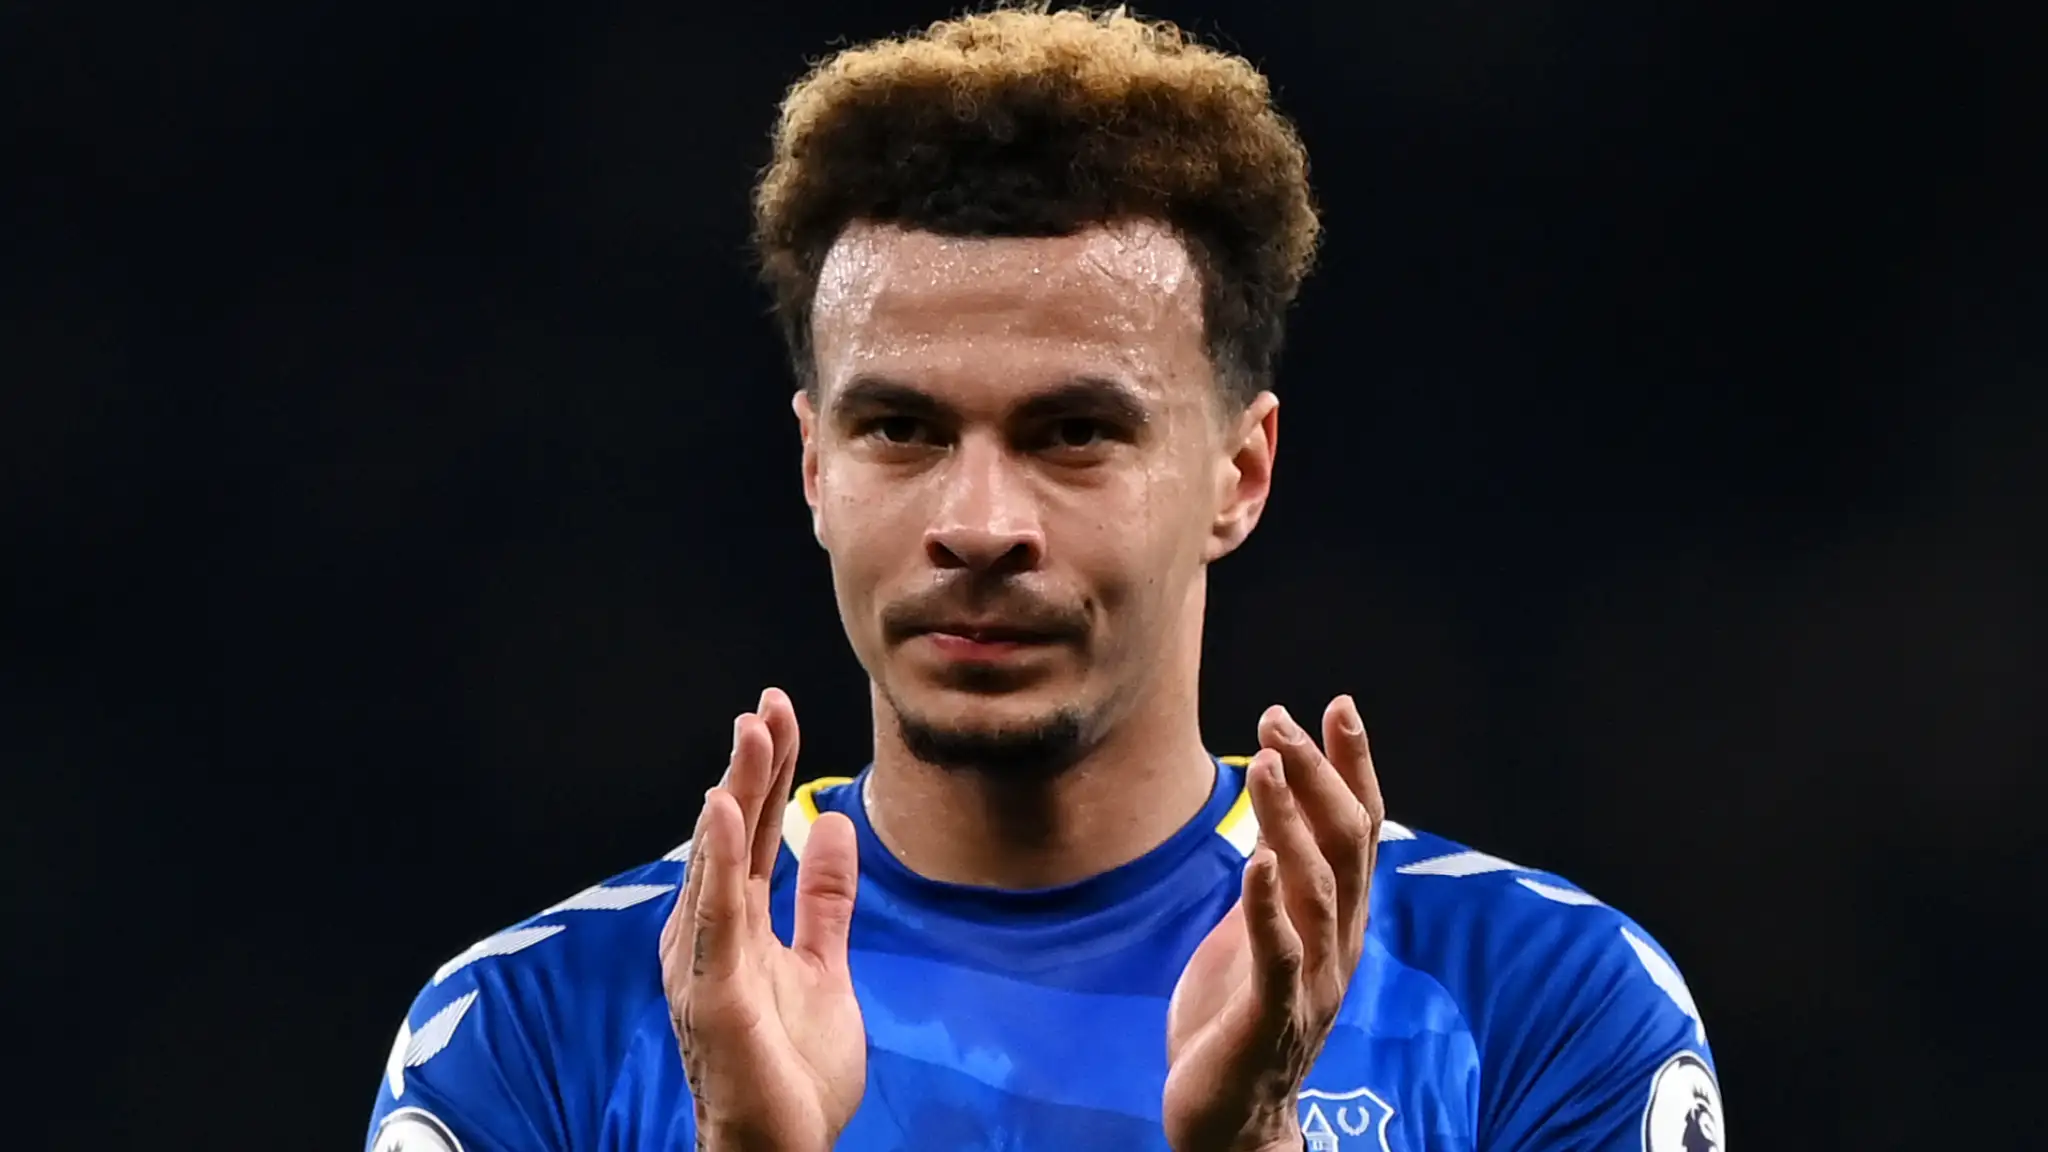 Dele Alli sent ‘time for the talking to stop’ transfer message as ex-Tottenham star prepares to leave Everton as a free agent with ‘bit between his teeth’